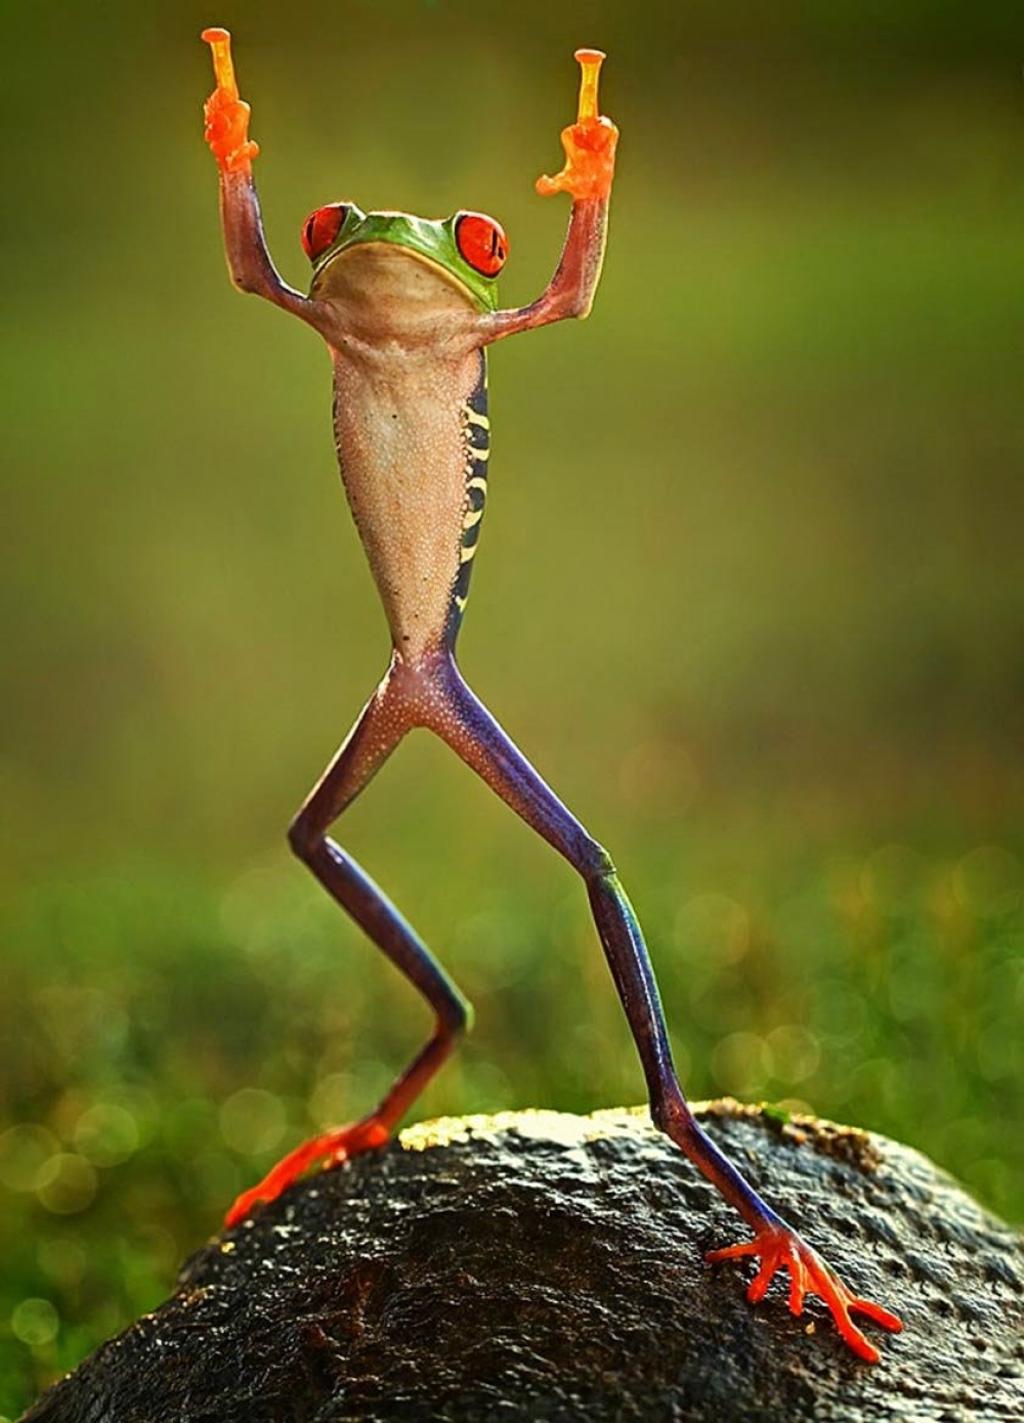 Frog Funny Two Thumbs Up Image